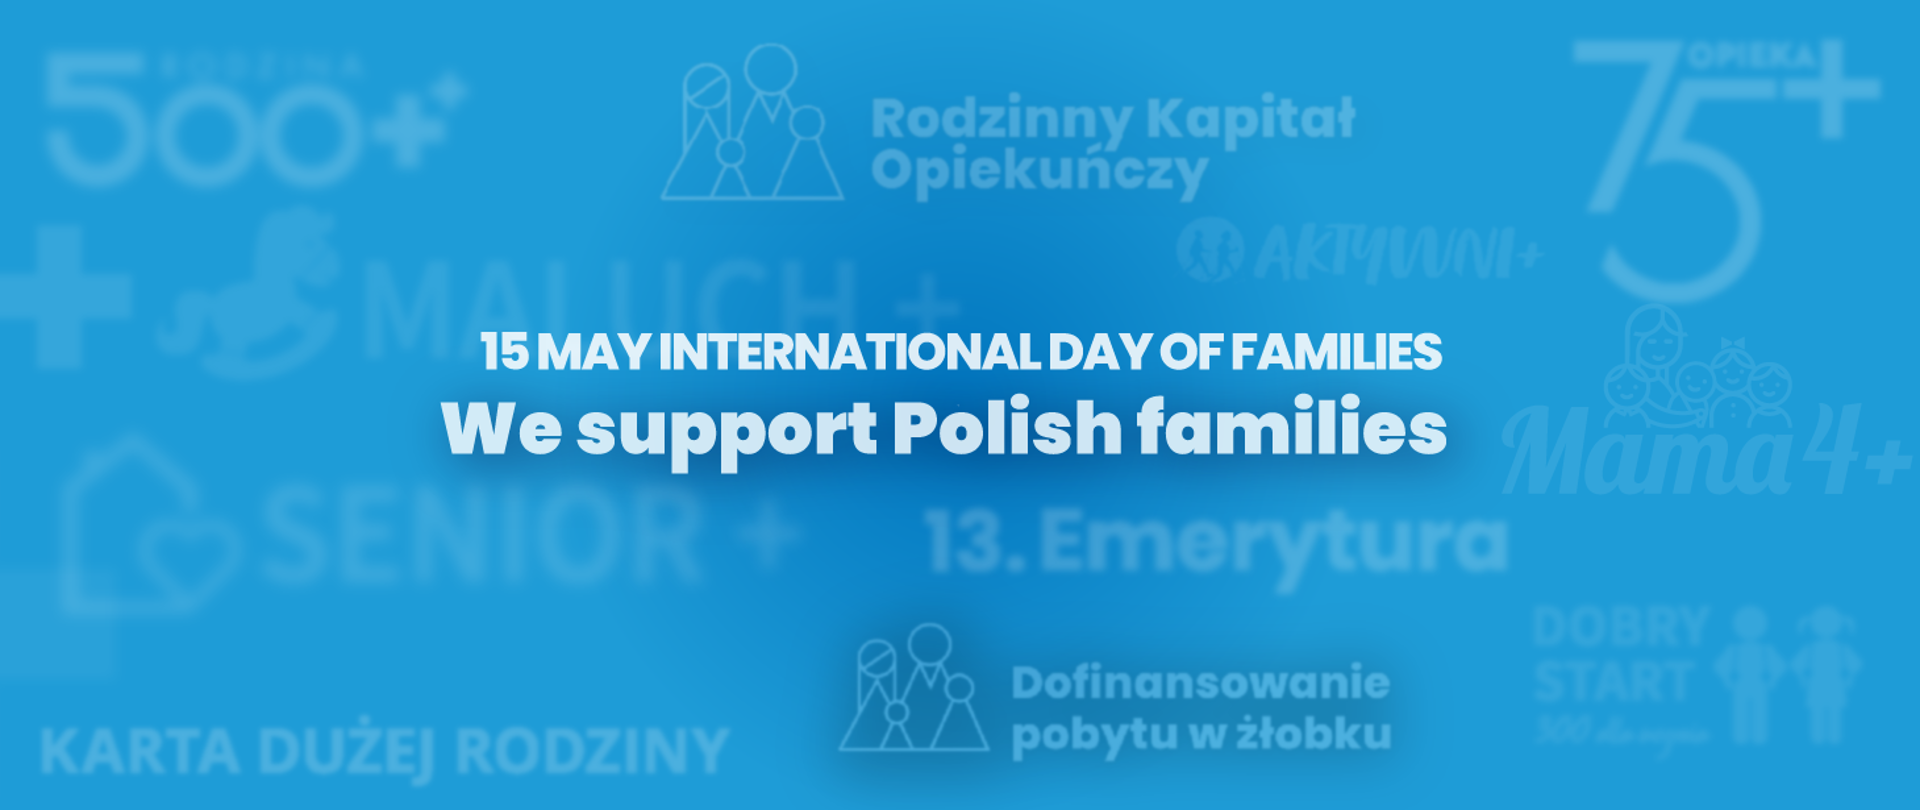 We support Polish families